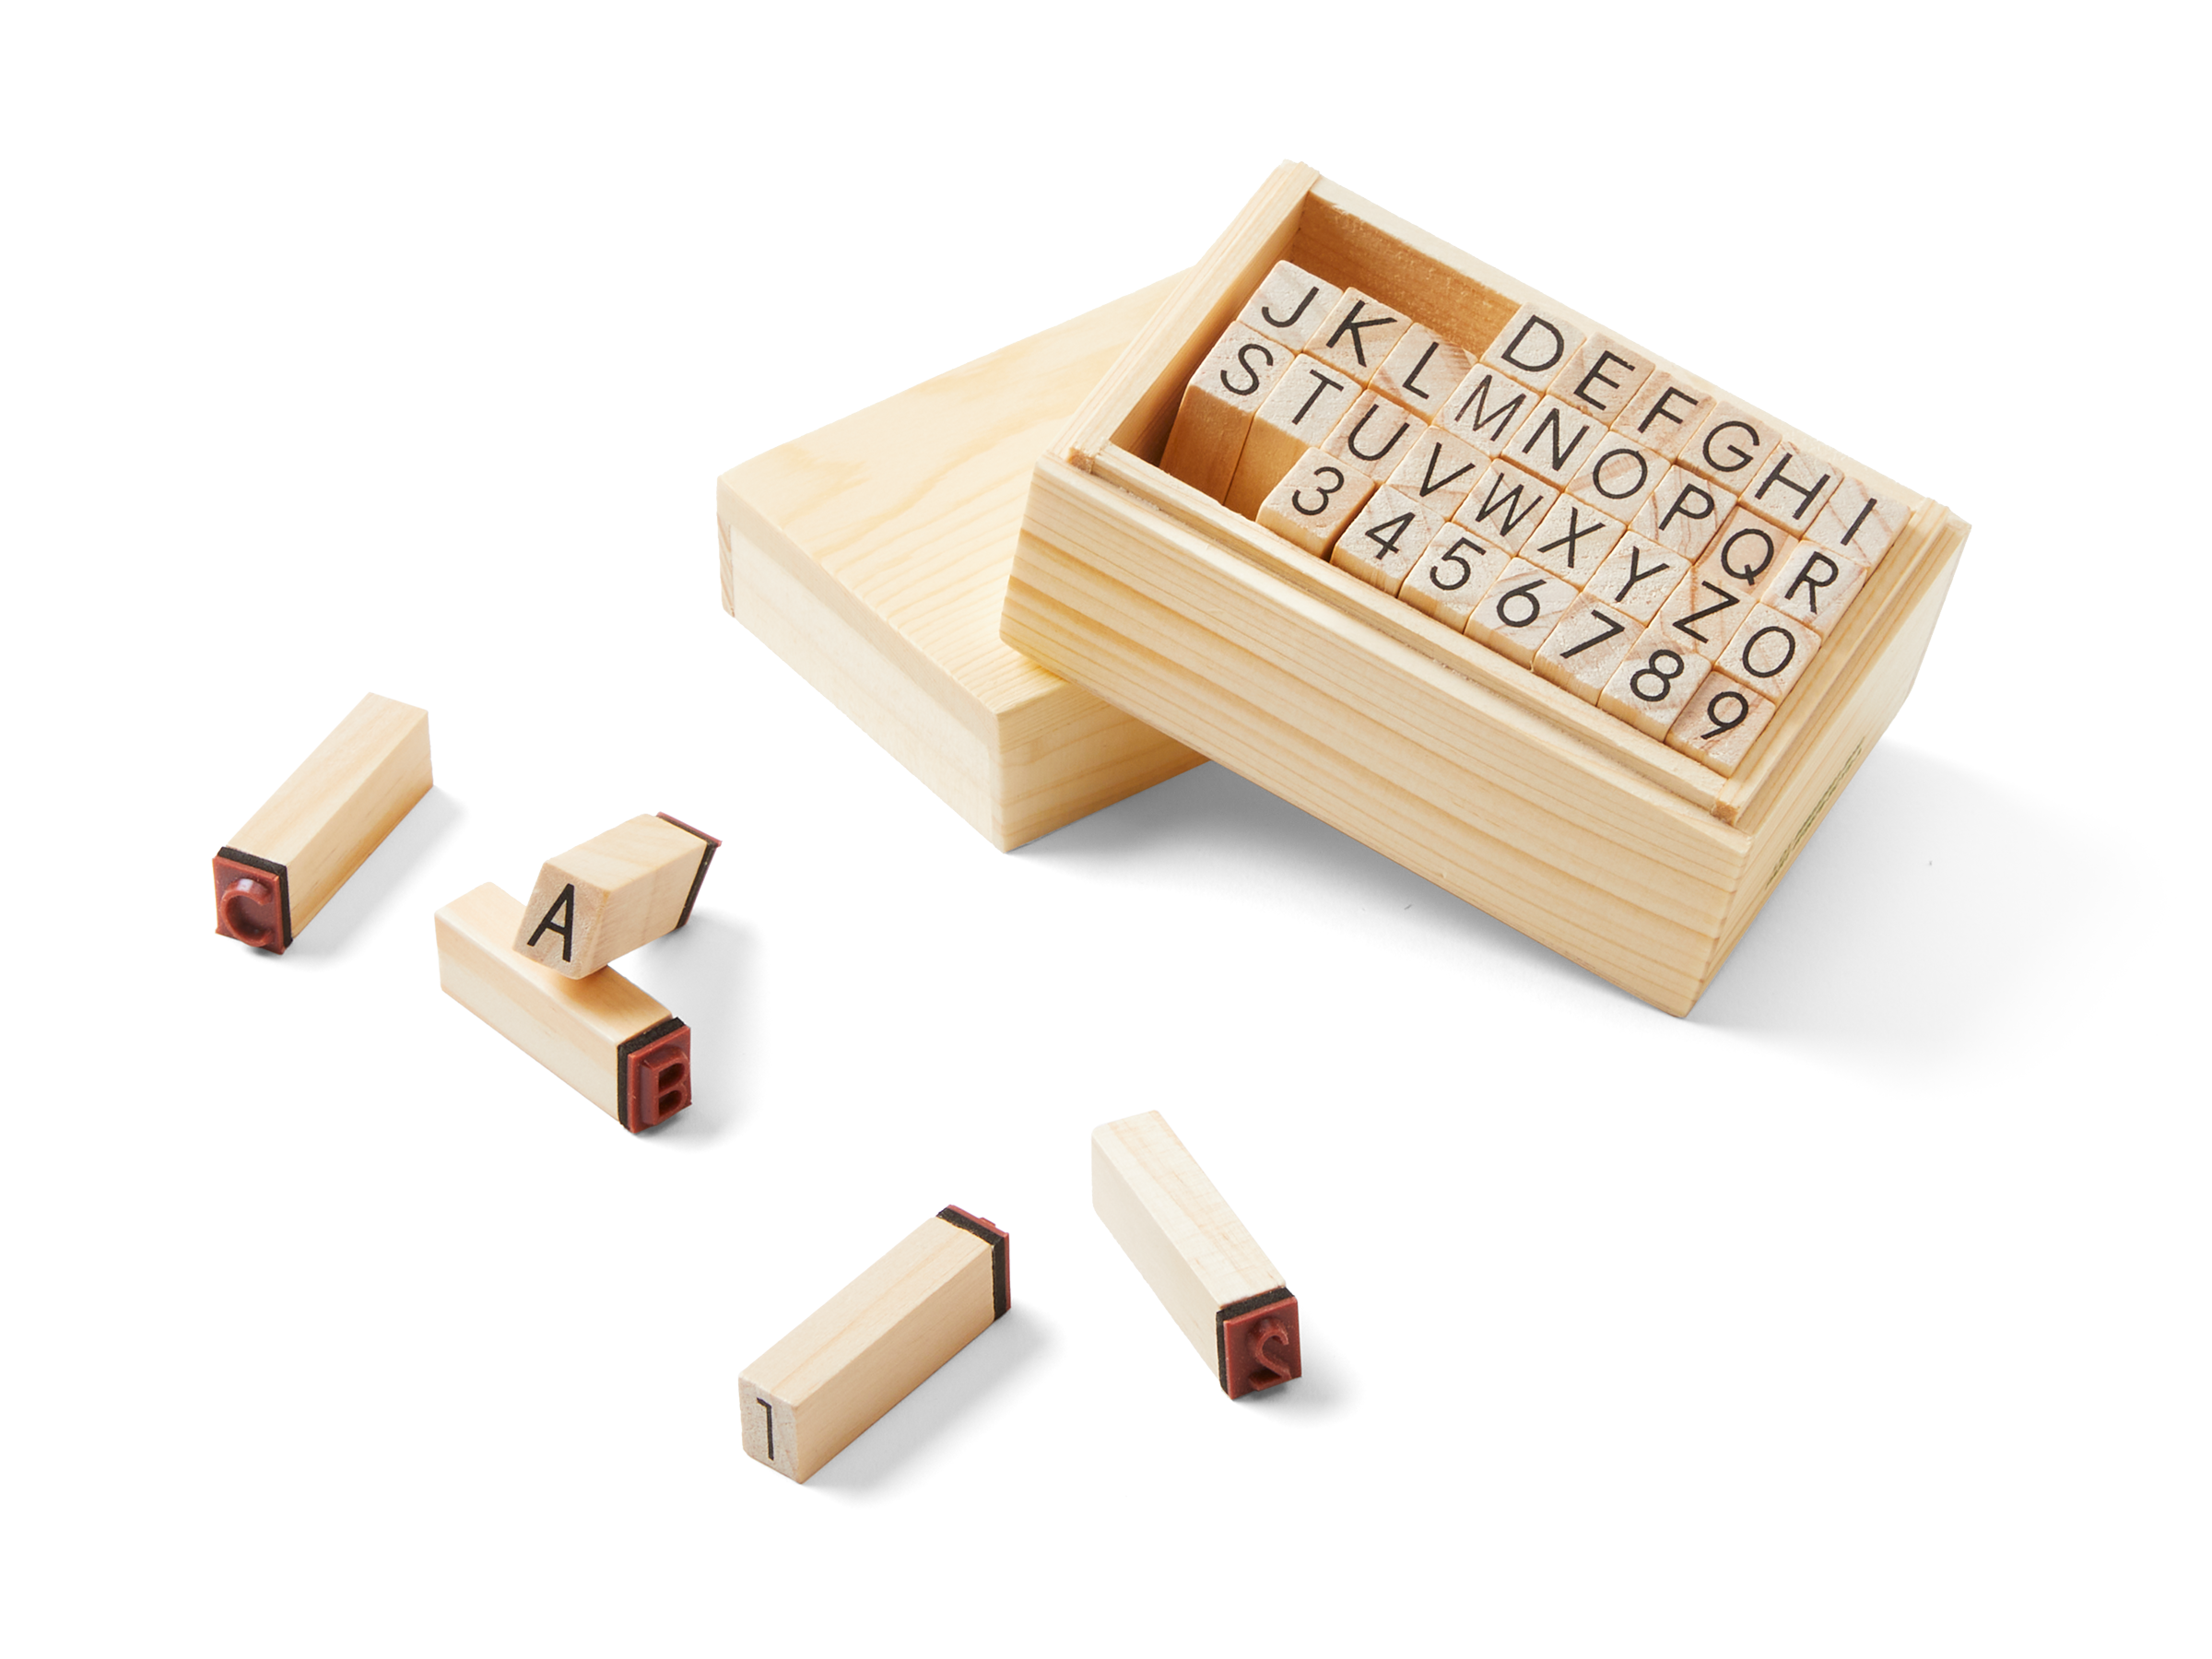 40-Piece Numbers Alphabet Symbols Rubber Stamps with Ink Pad Set - Wooden  Rubber Stamps for DIY Crafts